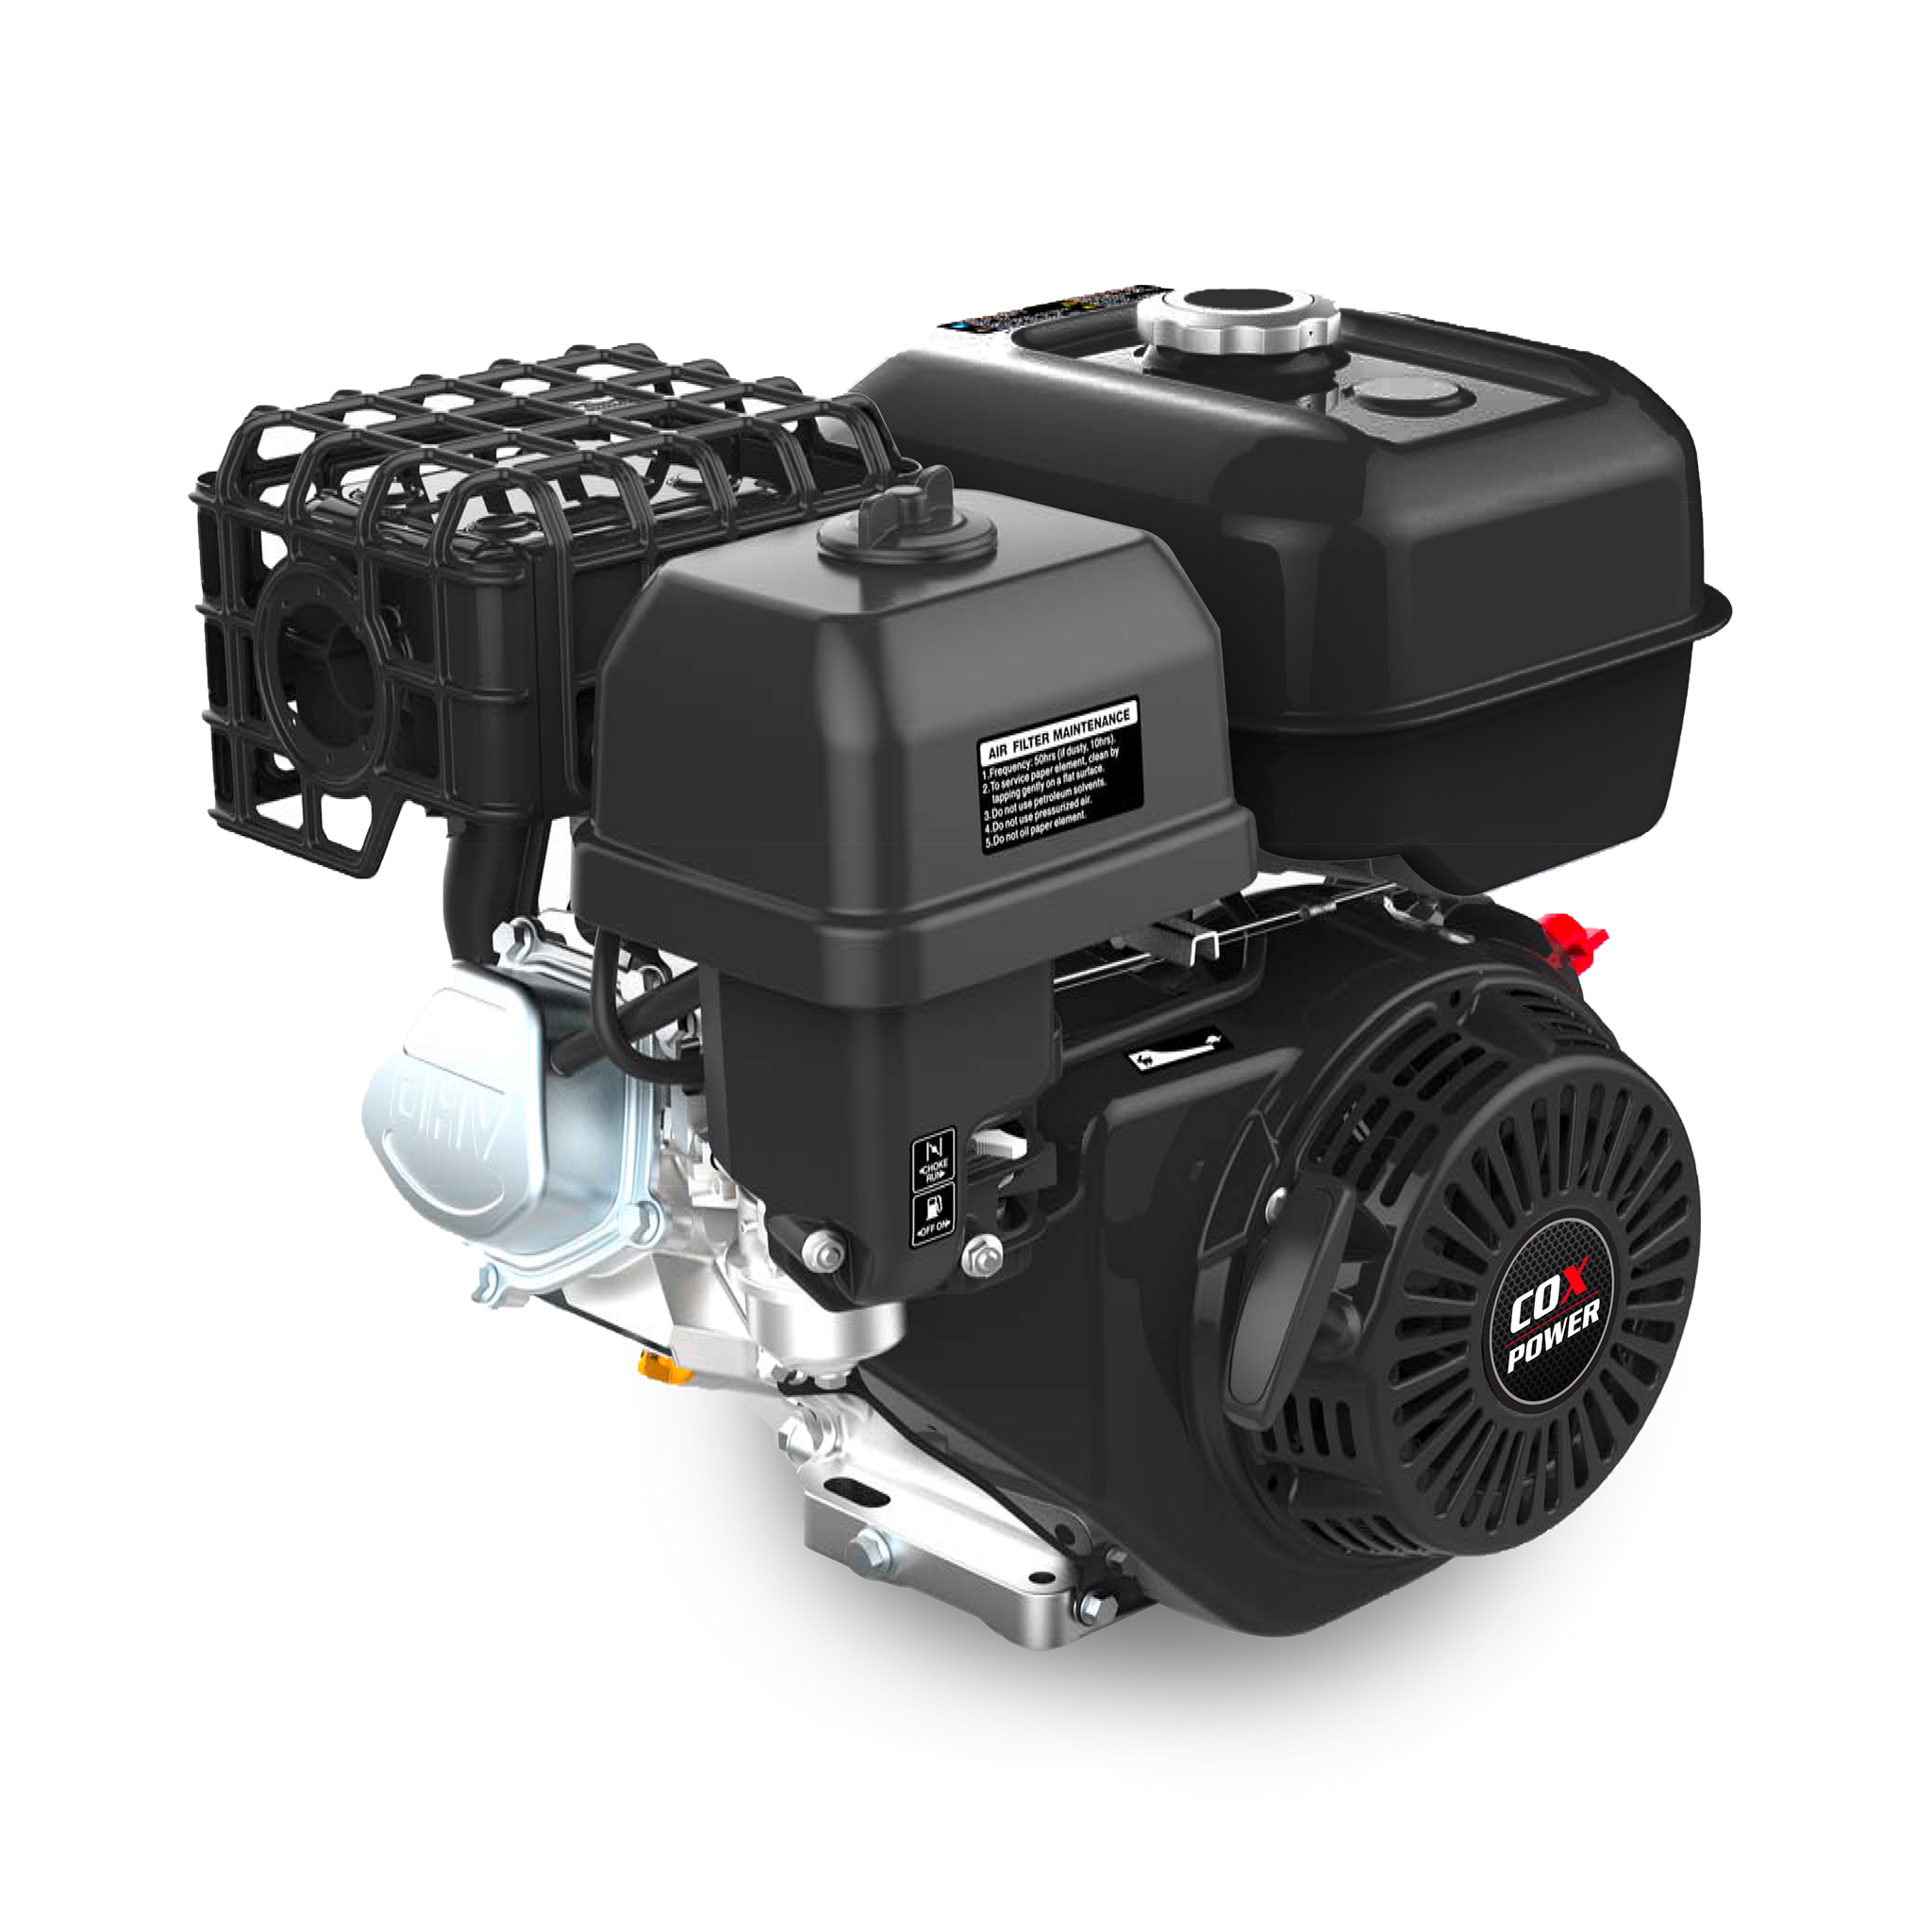 COX Power product image of a Horizontal Shaft Engine, 17hp with a recoil start